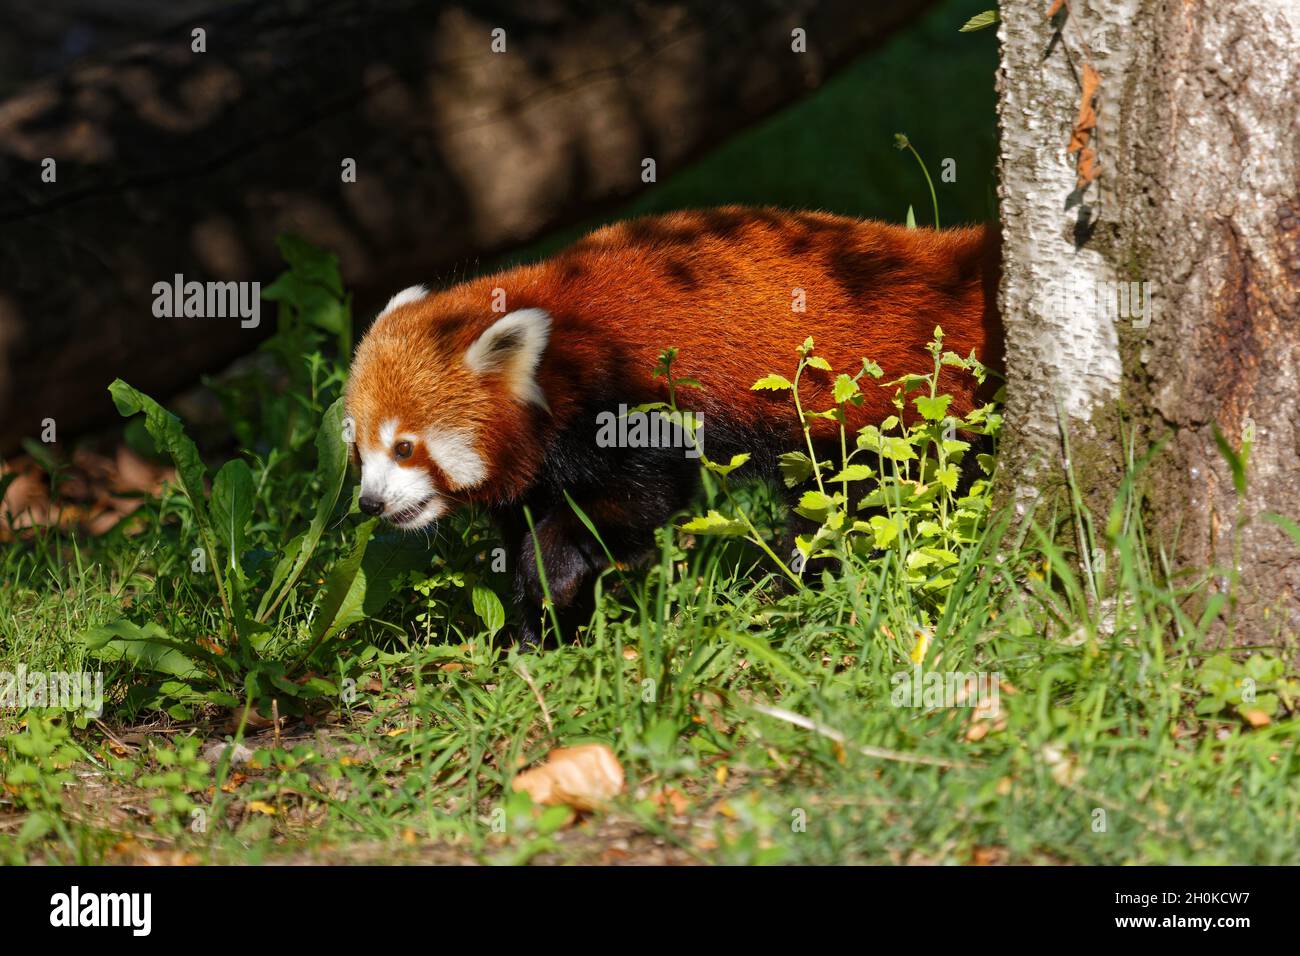 Firefox or red panda through the trees and herbs Stock Photo